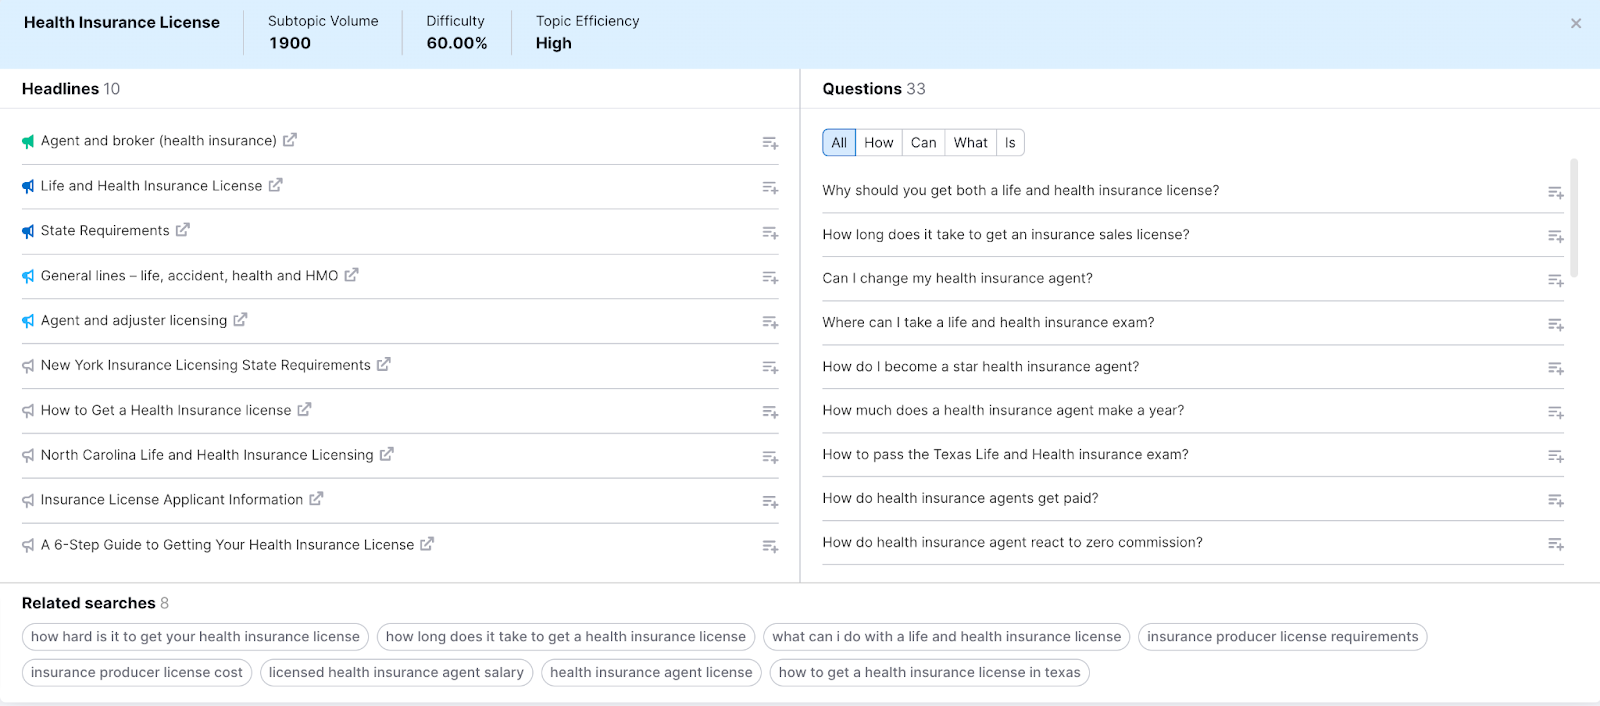 Headlines, questions, and related searches sections for "health insurance licence"